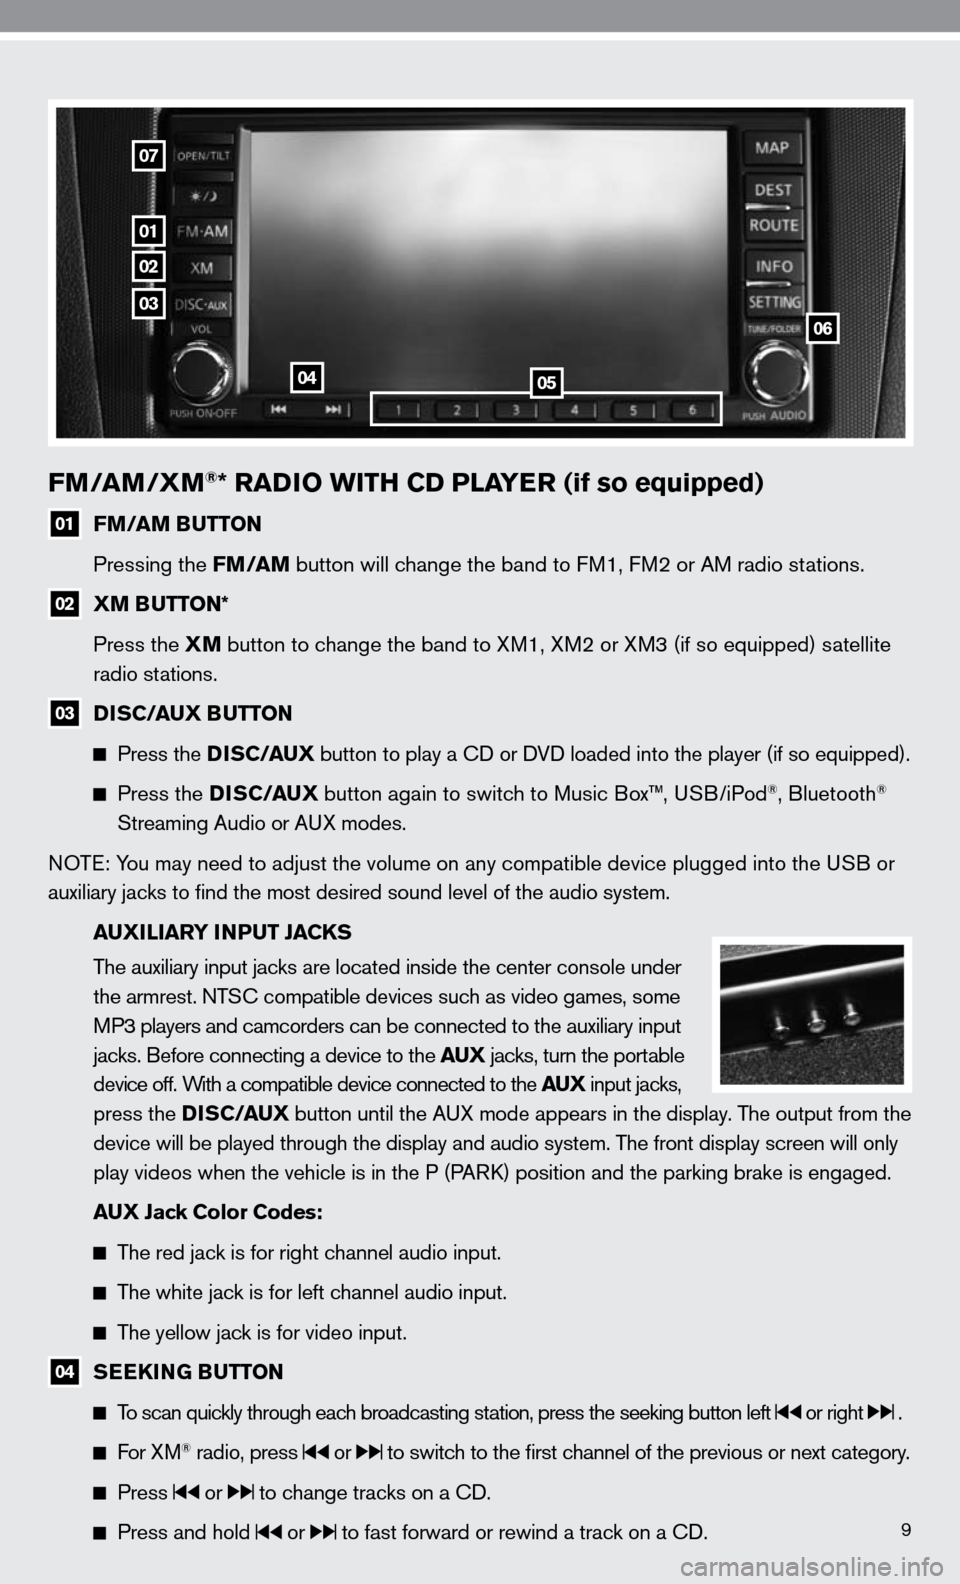 NISSAN ALTIMA HYBRID 2010 L32A / 4.G Quick Reference Guide 9
FM/AM/XM®* RADIO WITH CD PLAYER (if so equipped)
01 FM/AM BUTTON
    Pressing the FM/AM button will change the band to f M1, fM2 or AM radio stations.  
02 XM BUTTON* 
    Press the XM  button to c